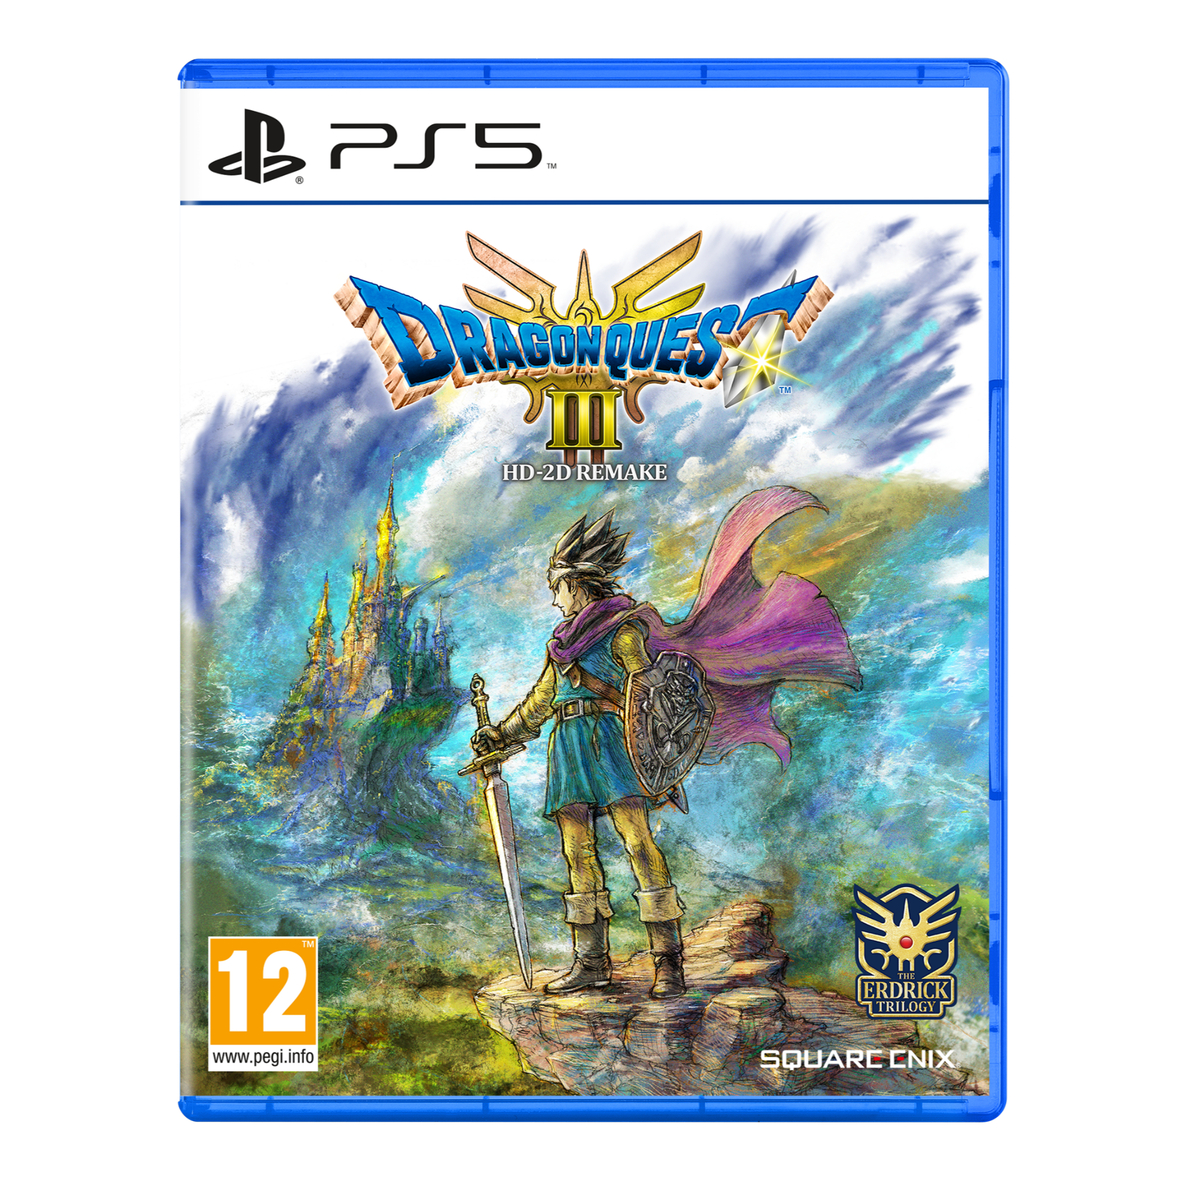 PRE-ORDER Dragon Quest III HD-2D Remake for PS5